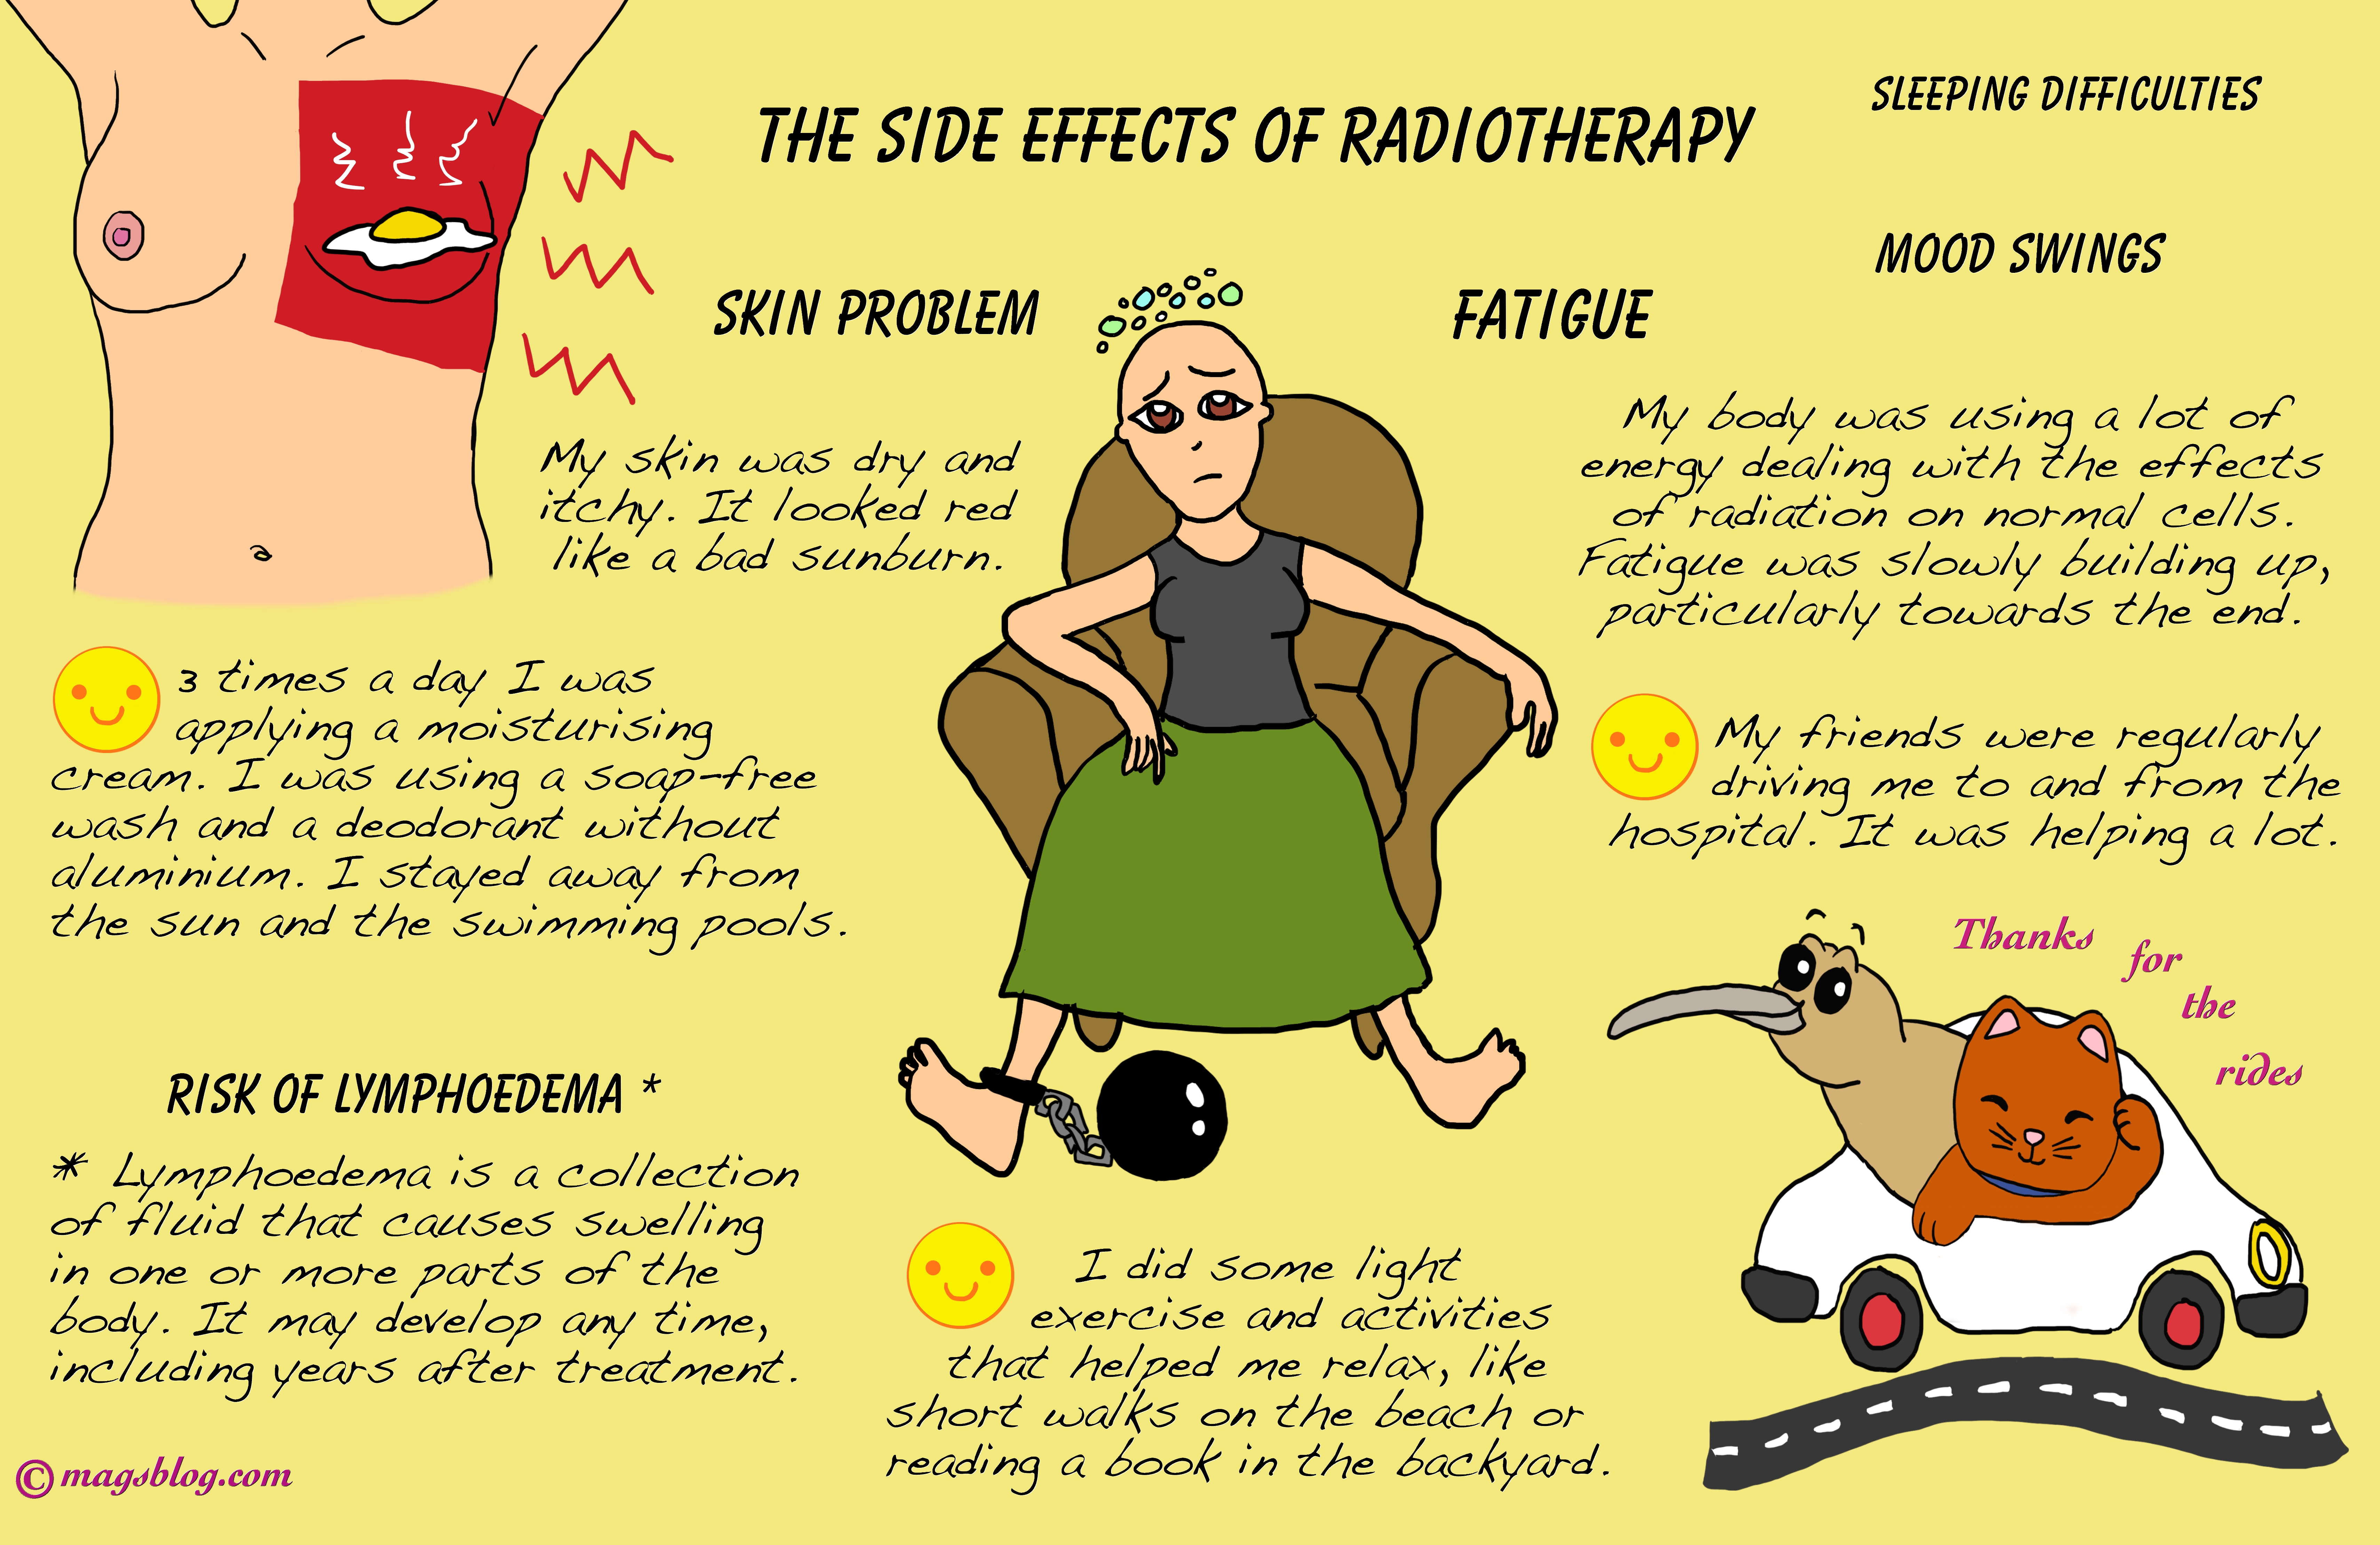 RADIOTHERAPY, SIDE EFFECTS